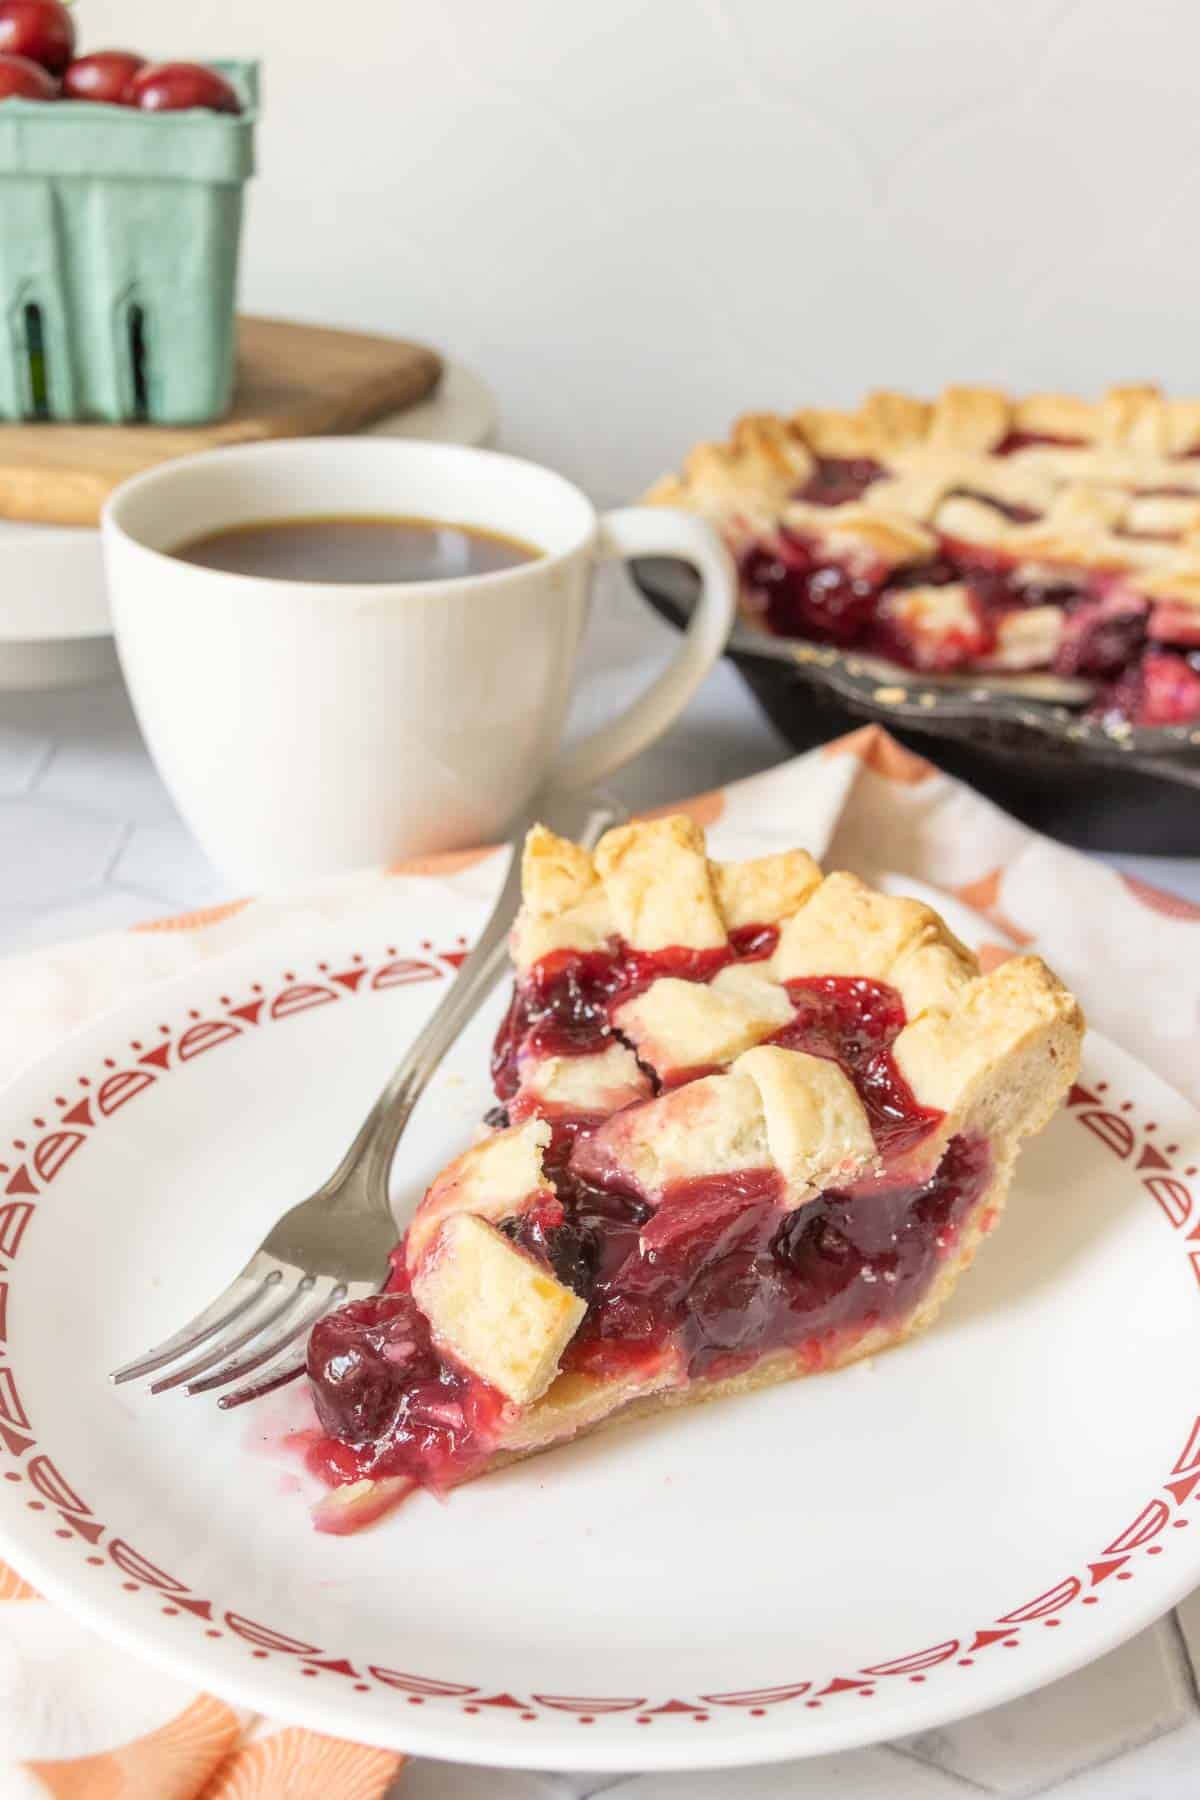 Slice of cherry pie on a white plate with red pattern, cup of coffee behind.